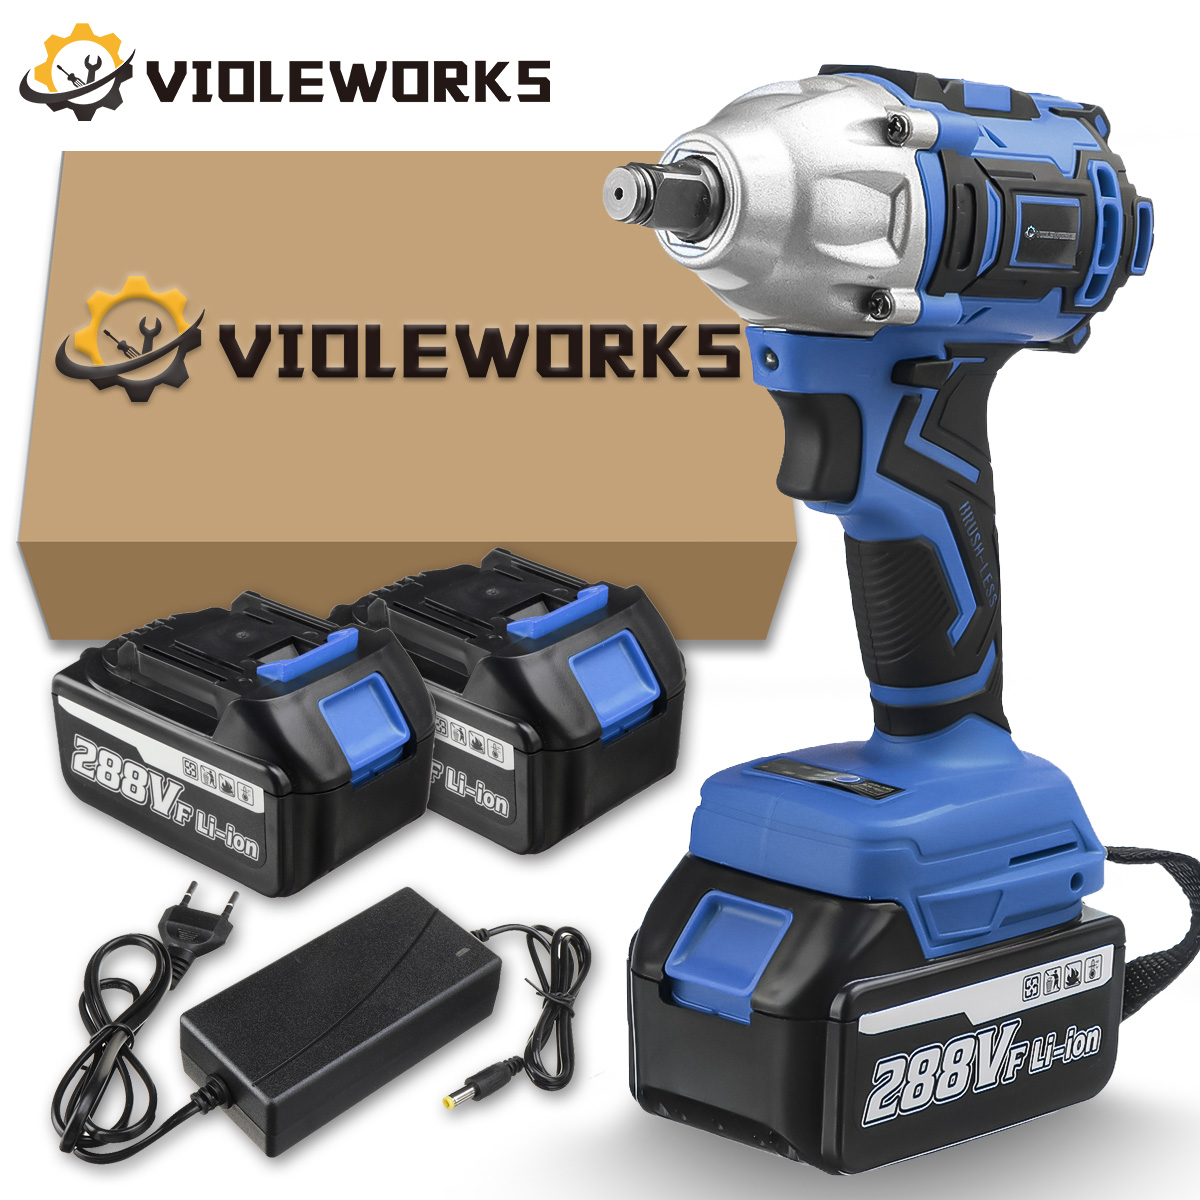 VIOLEWORKS-288VF-12quot-320NM-Electric-Wrench-Cordless-Brushless-Impact-Wrench-With-210-Battery-Also-1833240-10